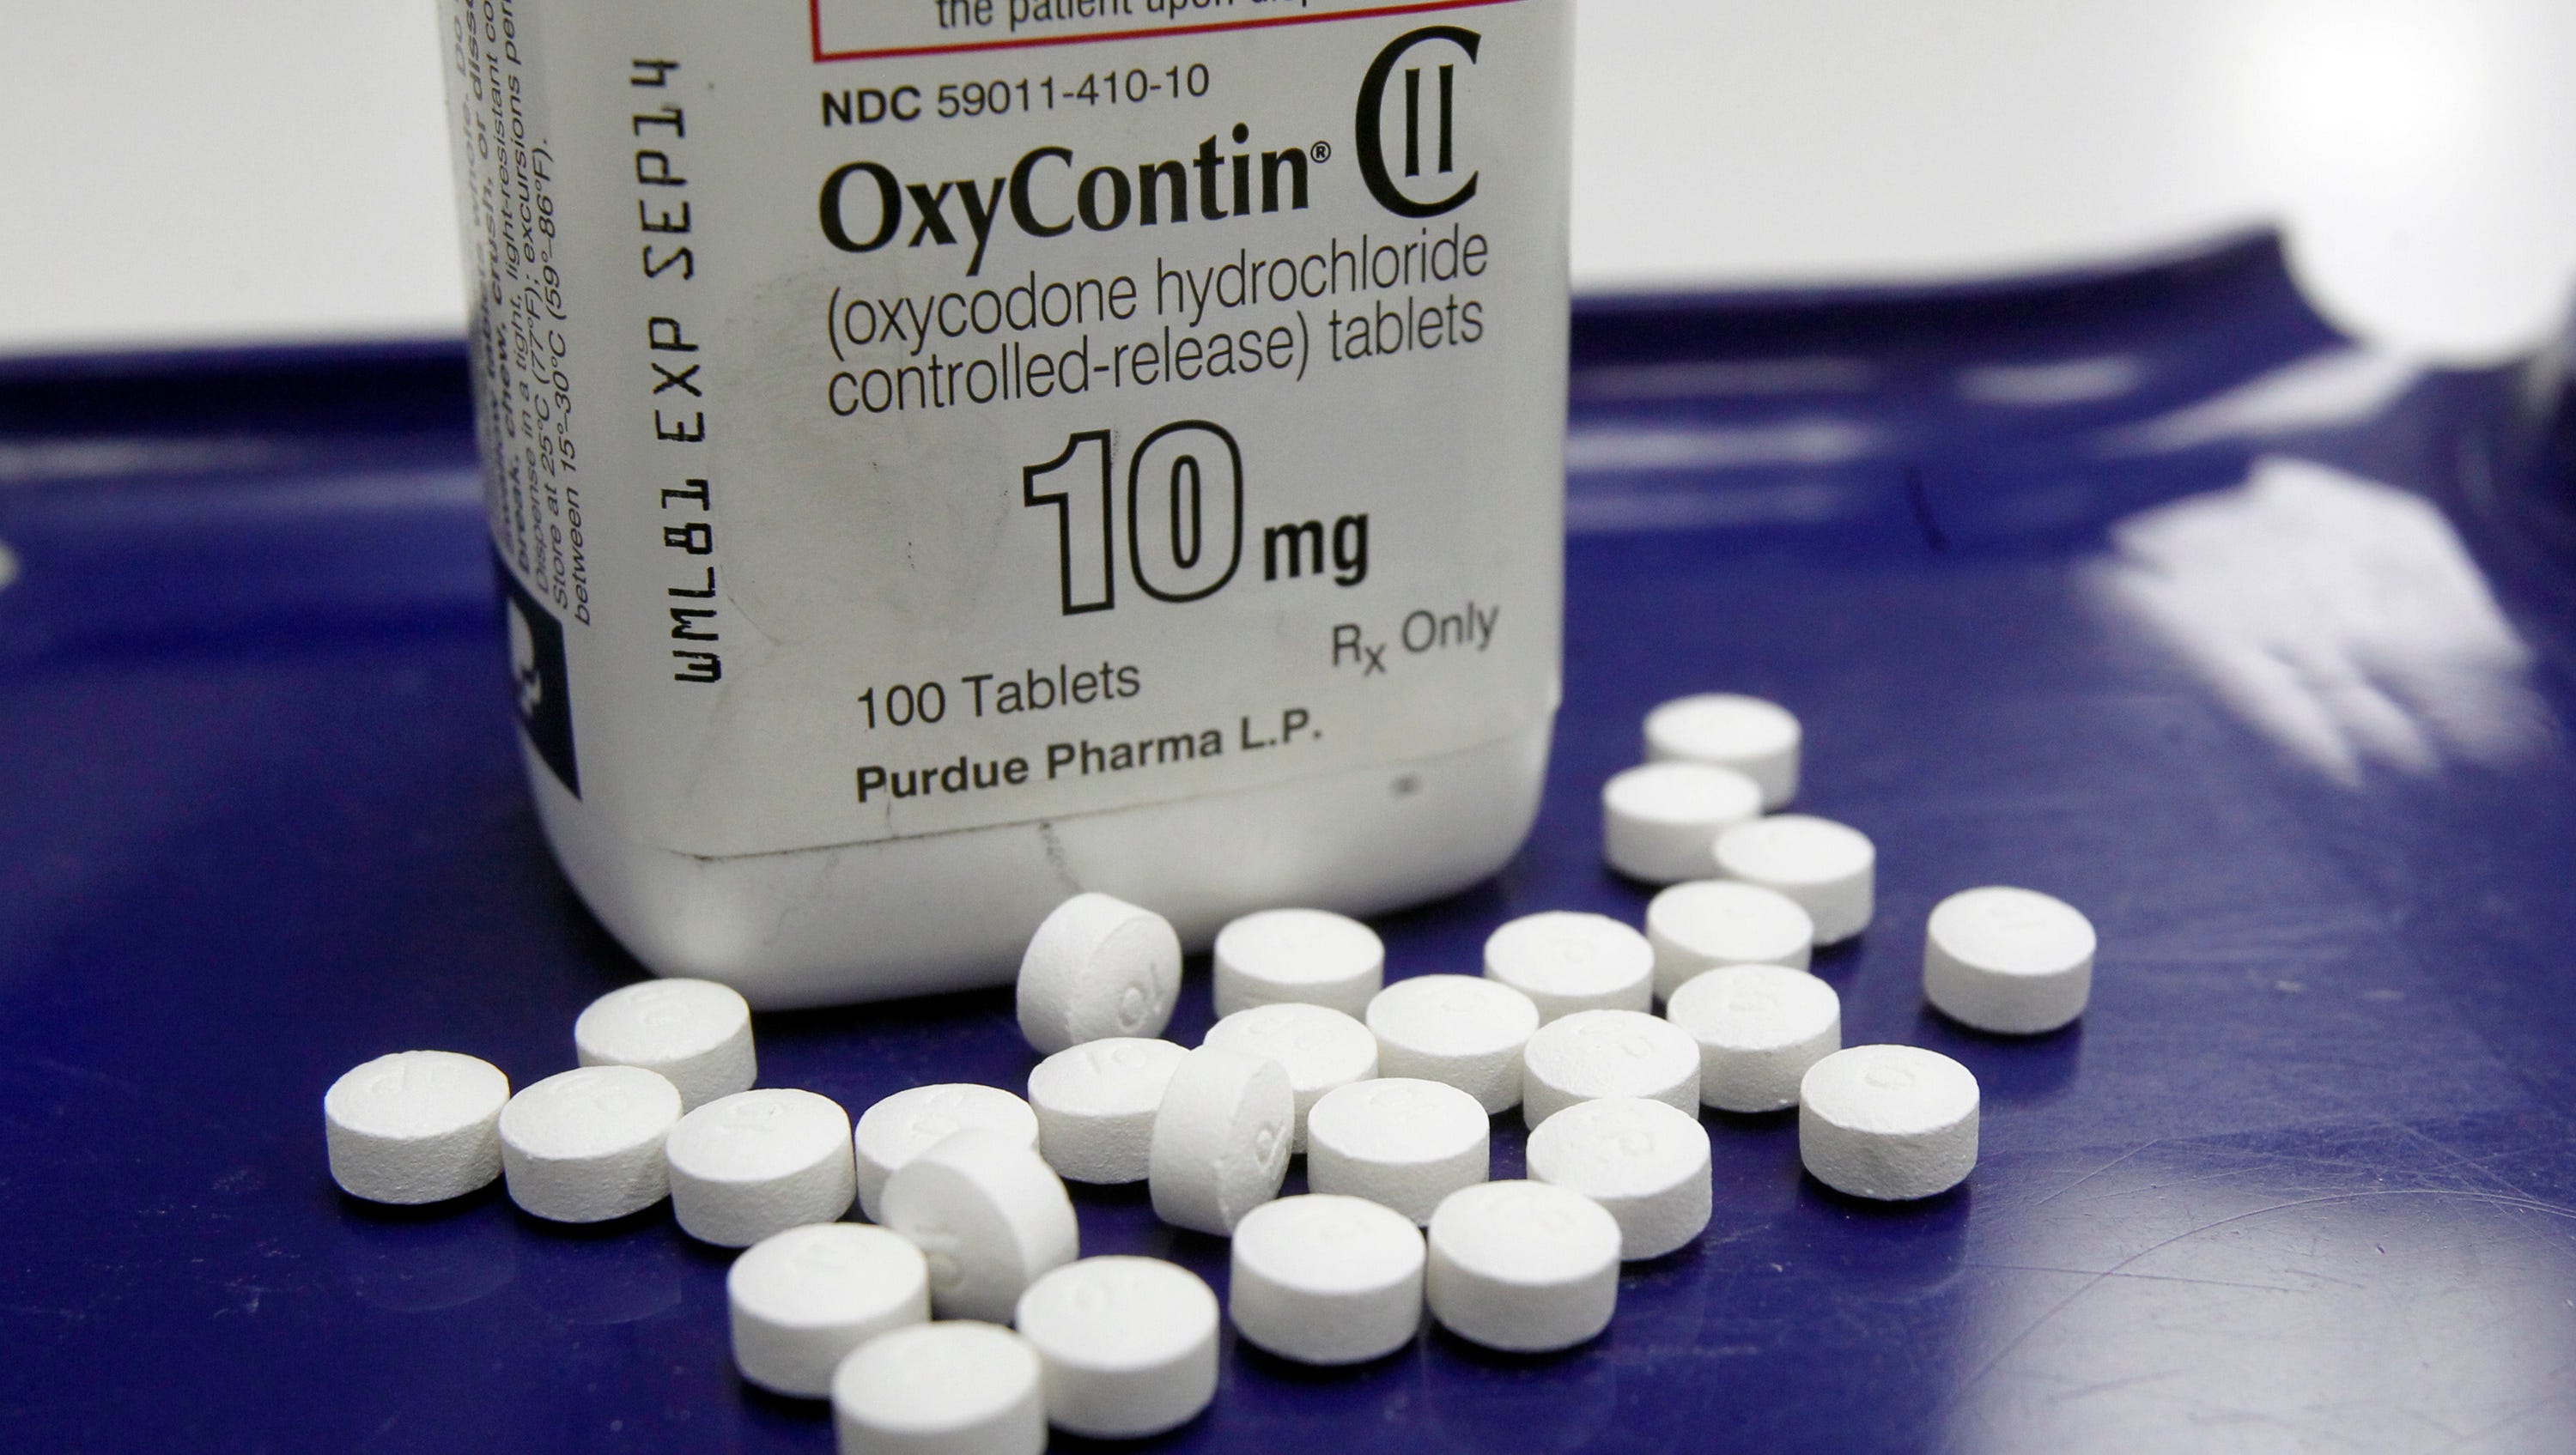 fda-approves-oxycontin-for-kids-11-to-16